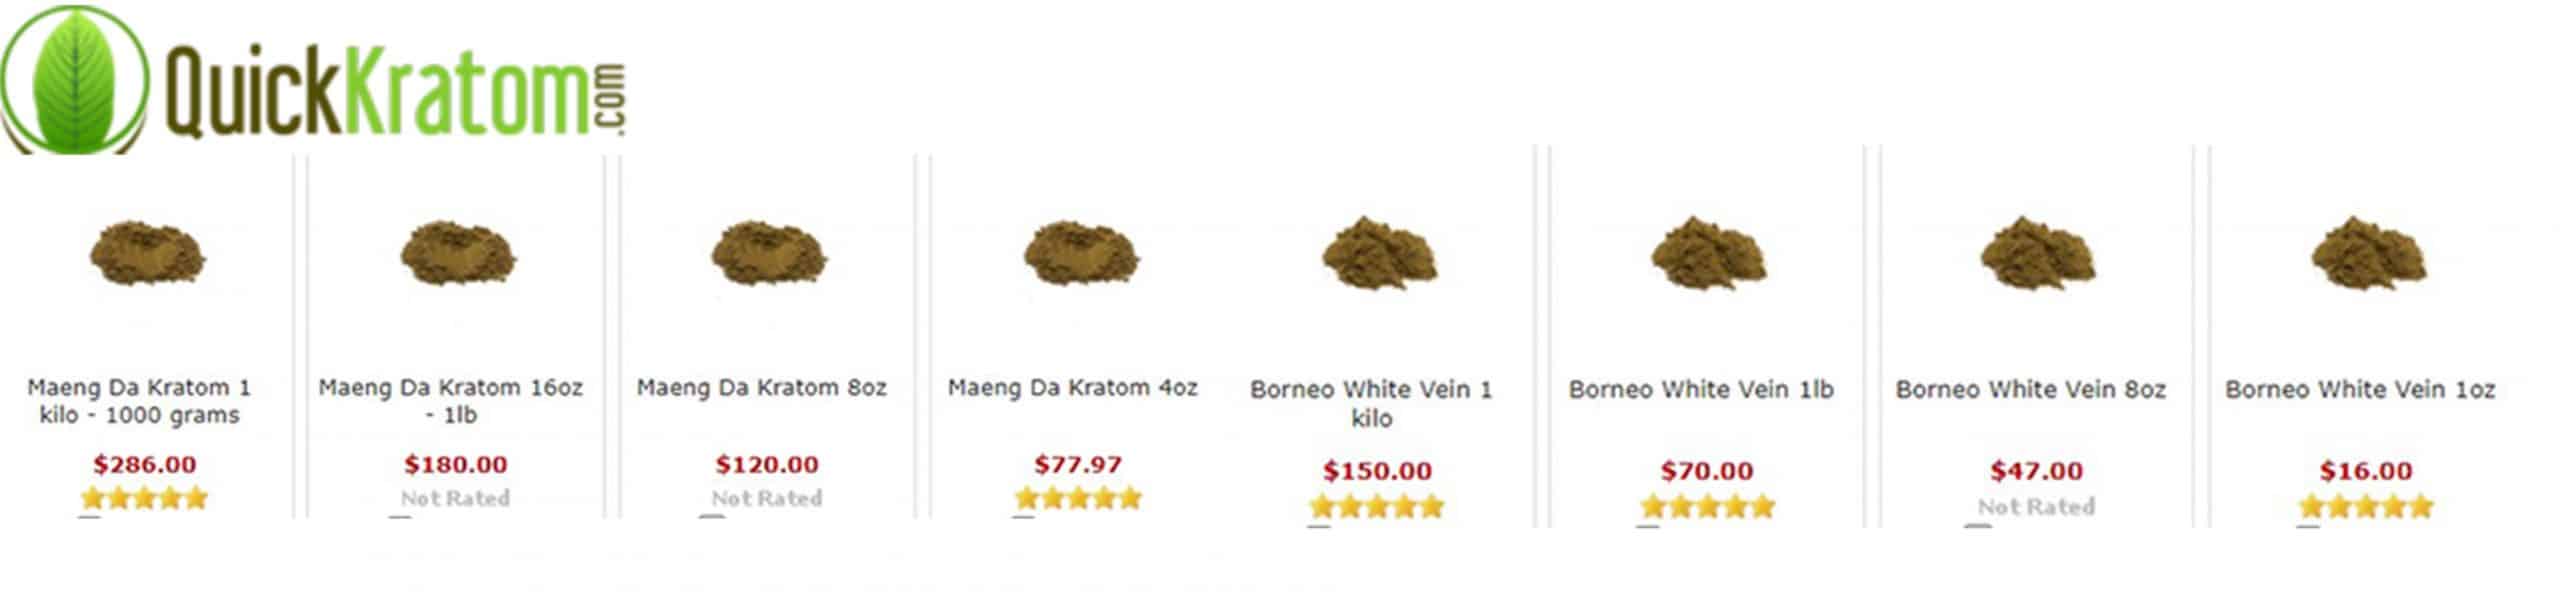 image of quick kratom products